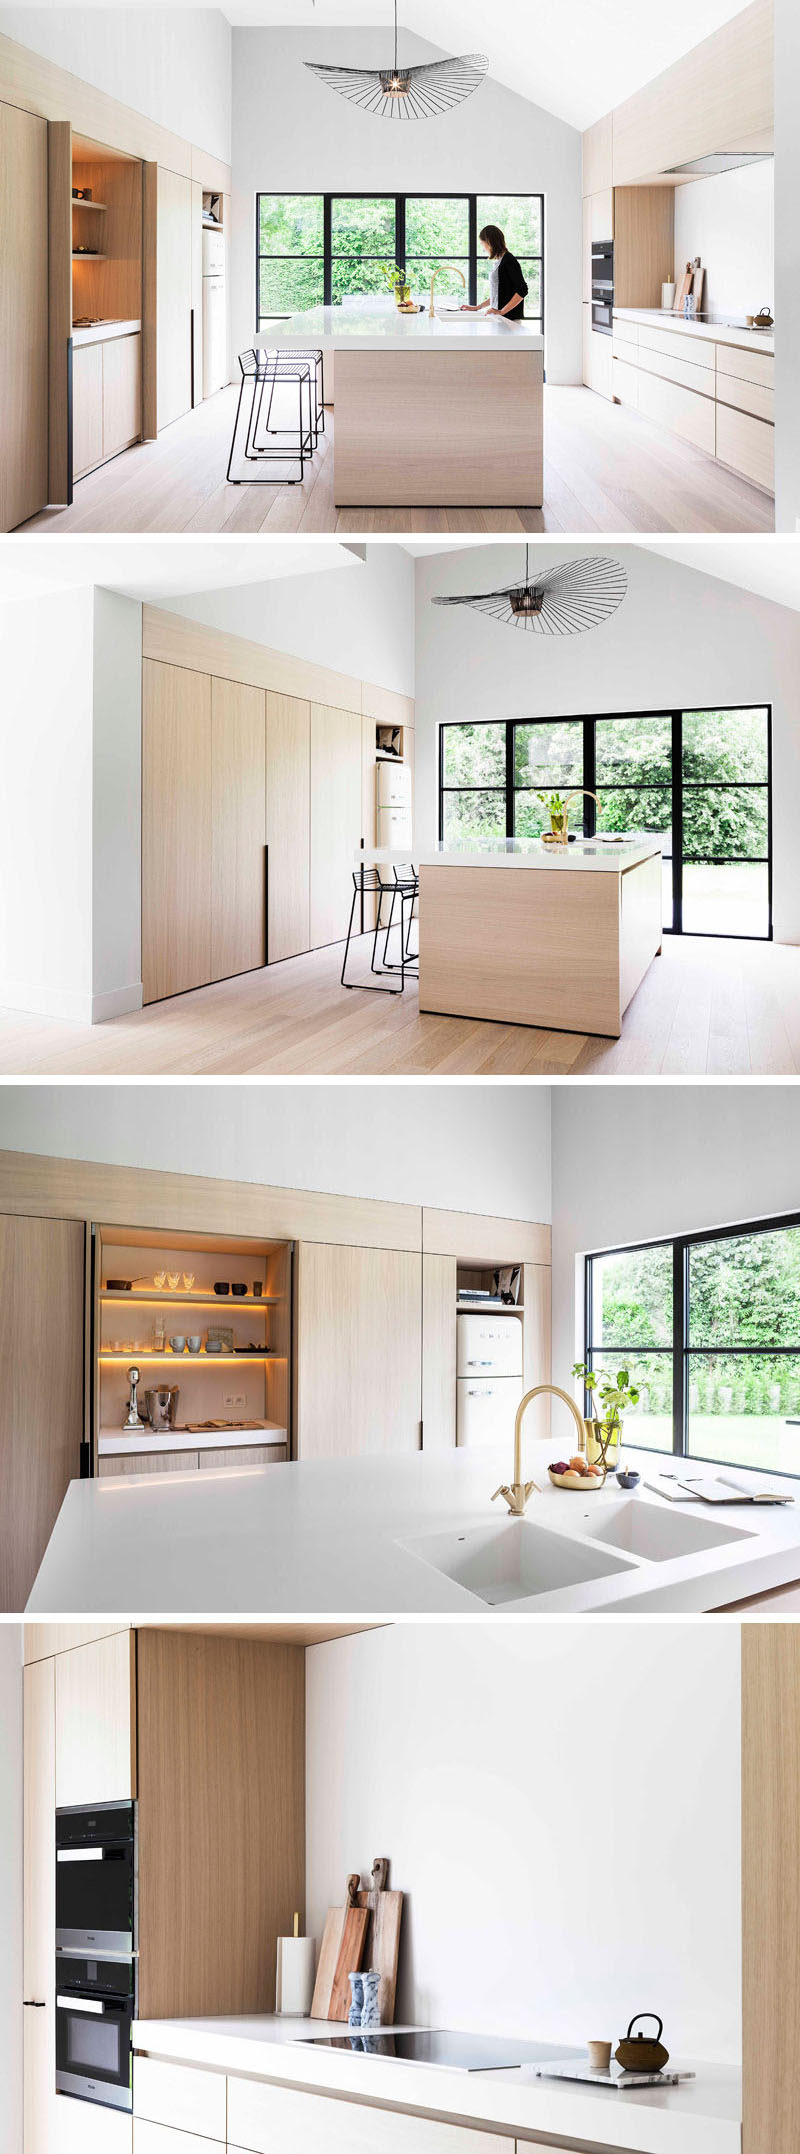 This modern and minimalist light wood and white kitchen features black accents like stools and window frames, a large central island, foldaway cabinet doors, and a pantry with hidden lighting.